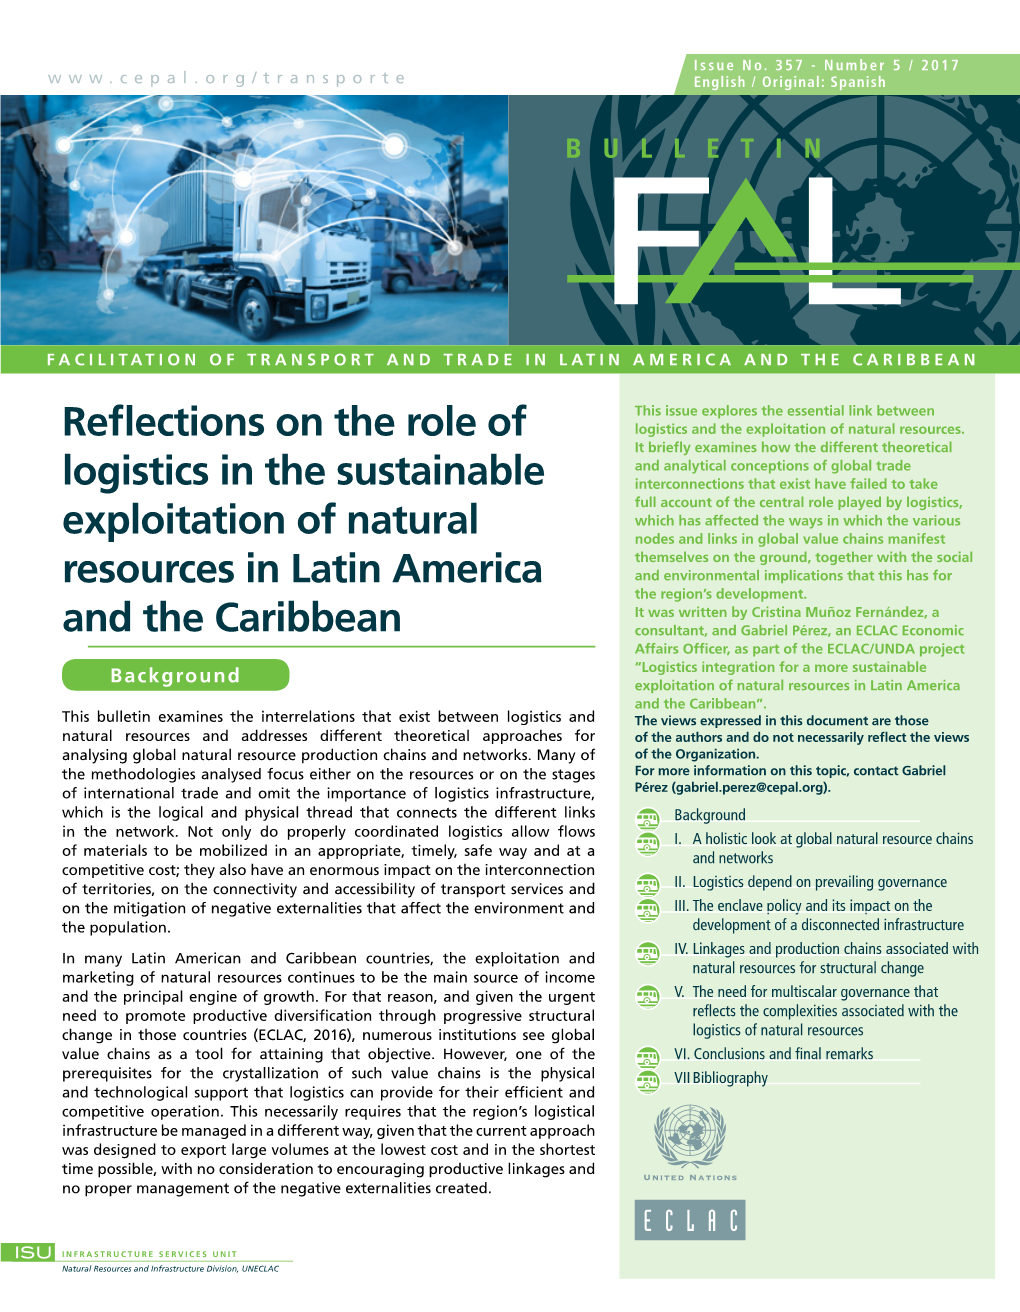 Reflections on the Role of Logistics in the Sustainable Exploitation of Natural Resources in Latin America and the Caribbean